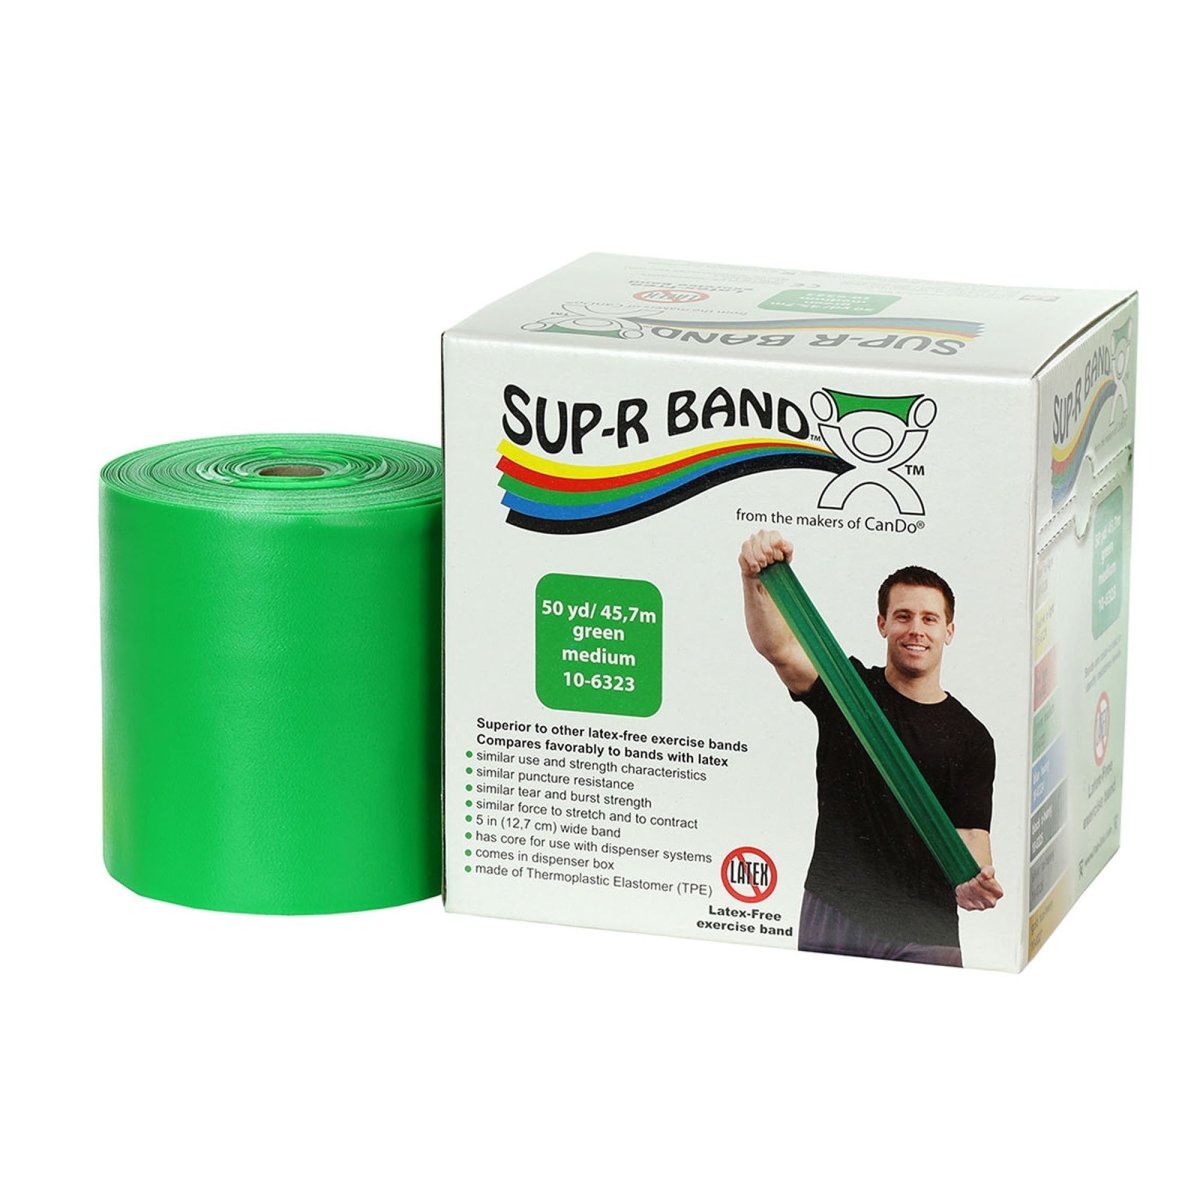 Sup-R Band Exercise Resistance Band, Green, 5 Inch x 50 Yard - 930537_EA - 1